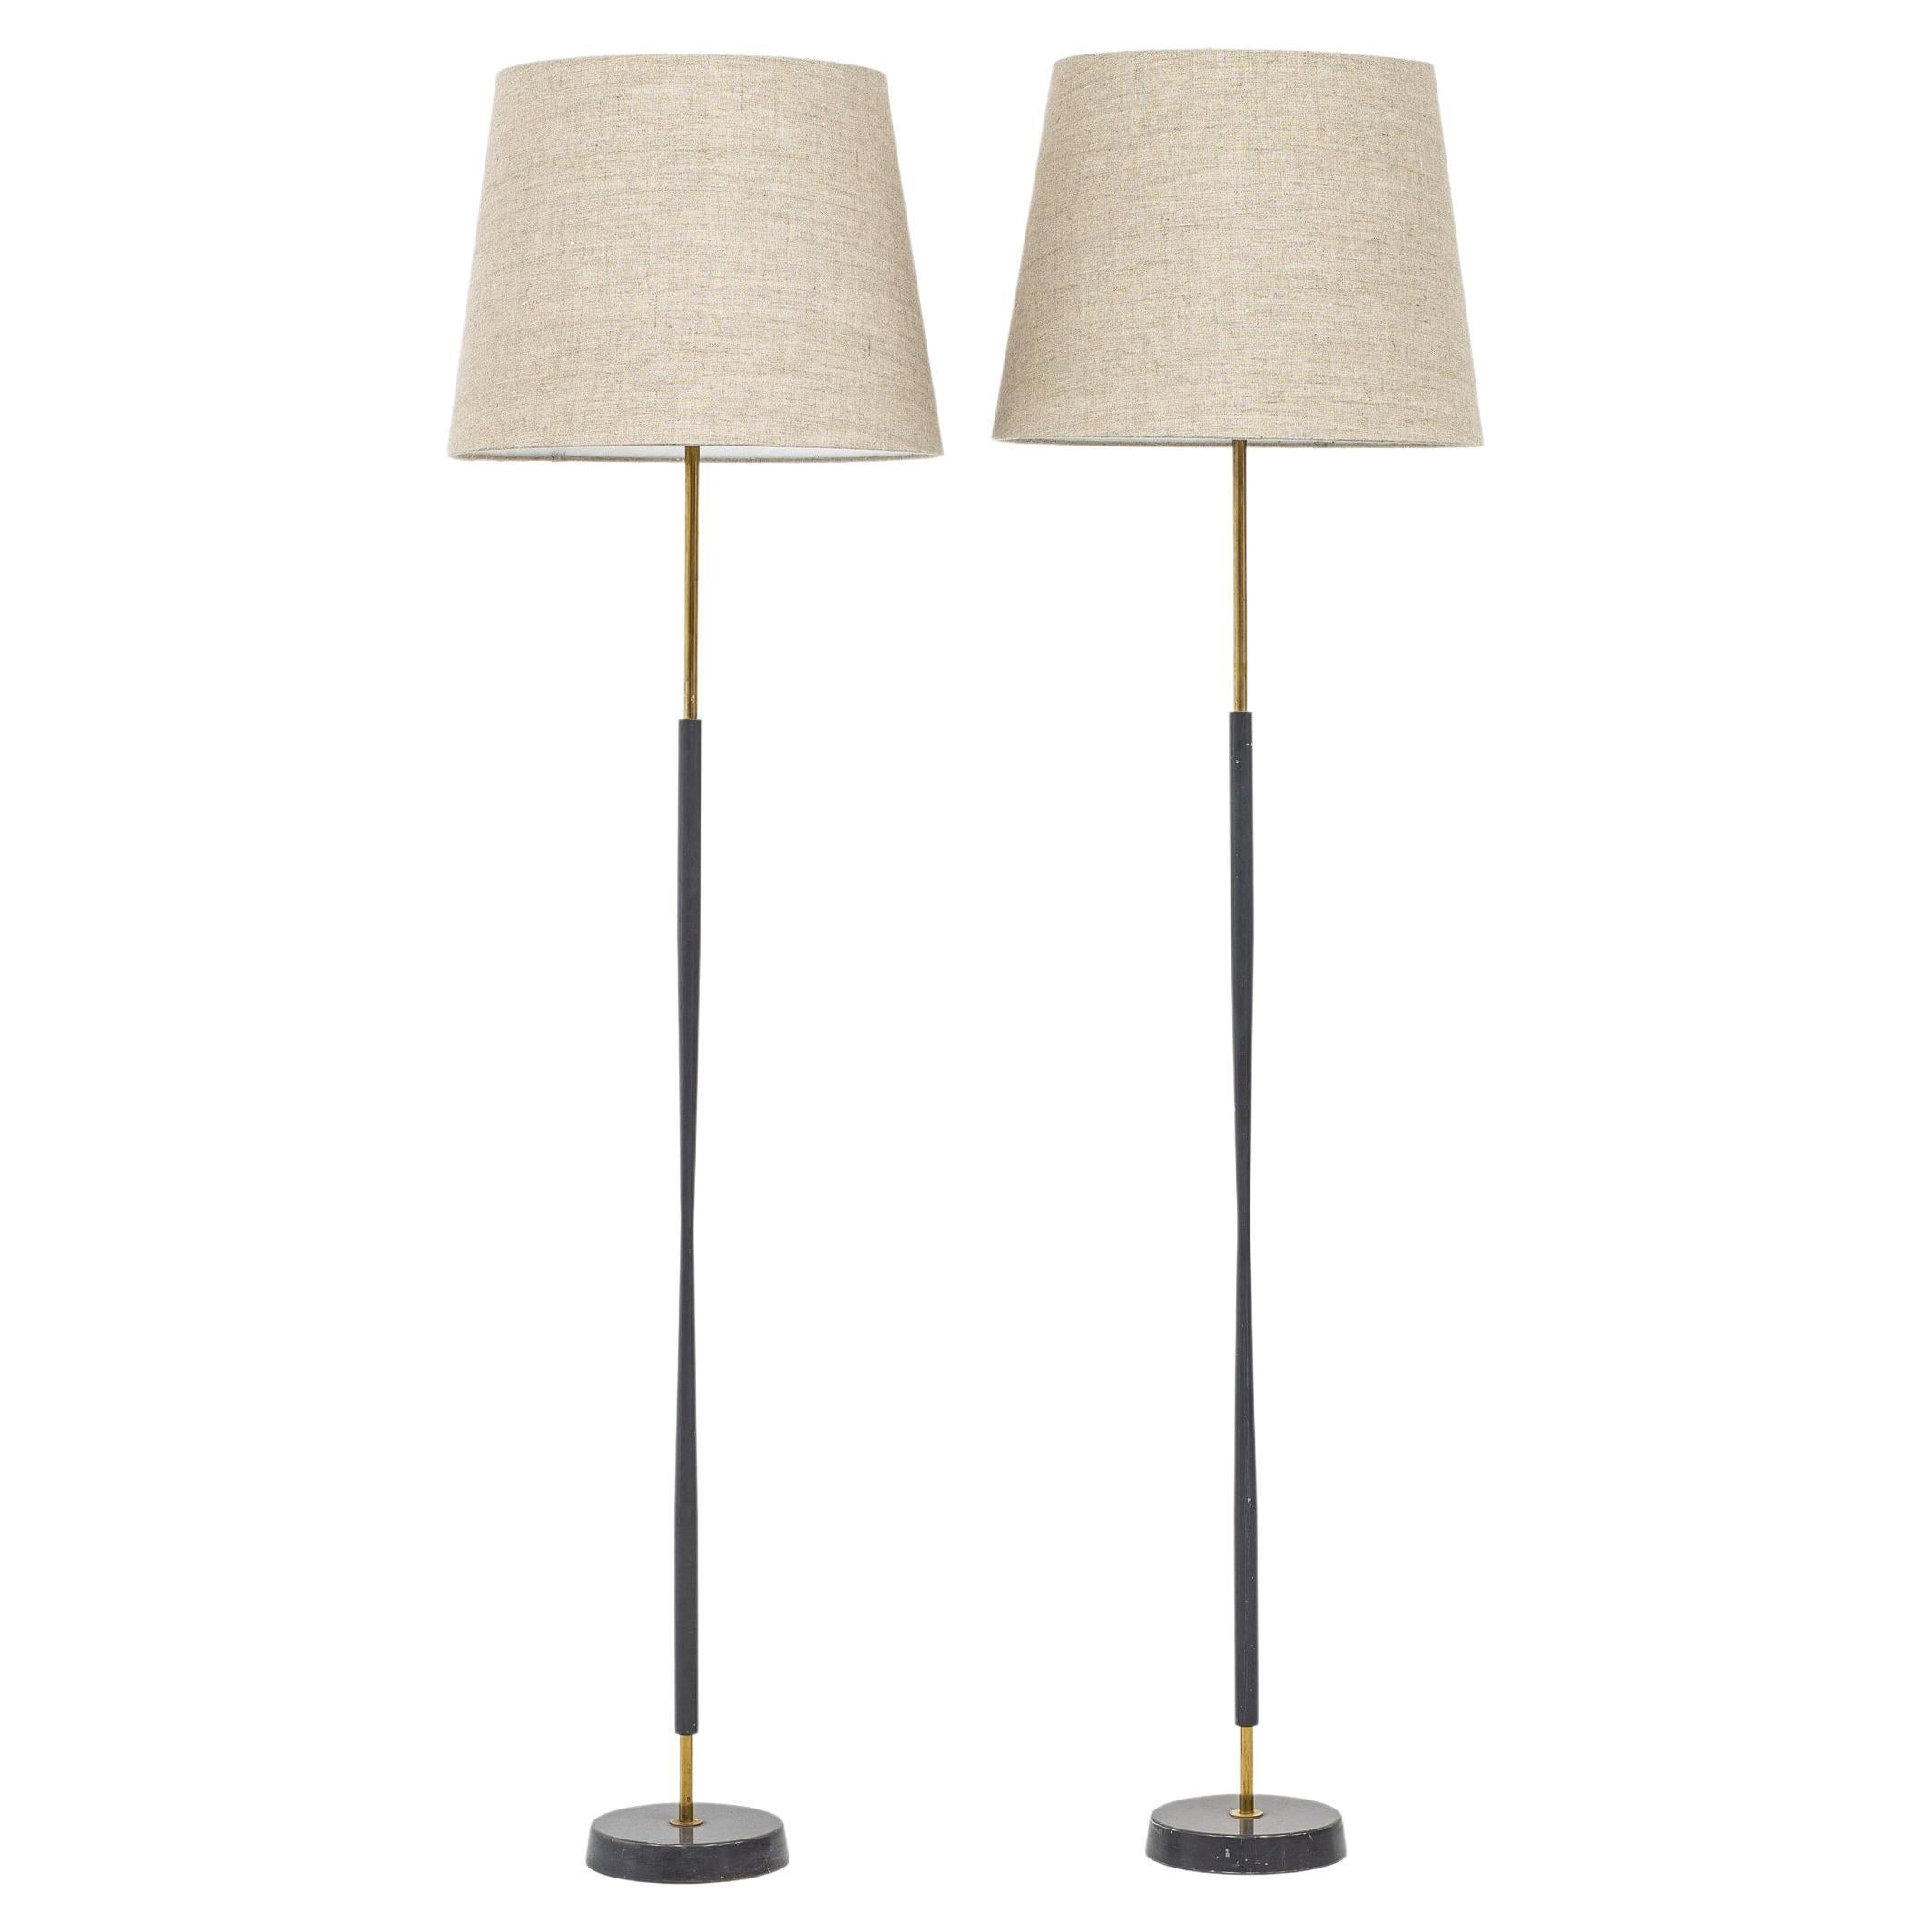 Floor Lamps by ASEA Belysning, Sweden, 1950s For Sale